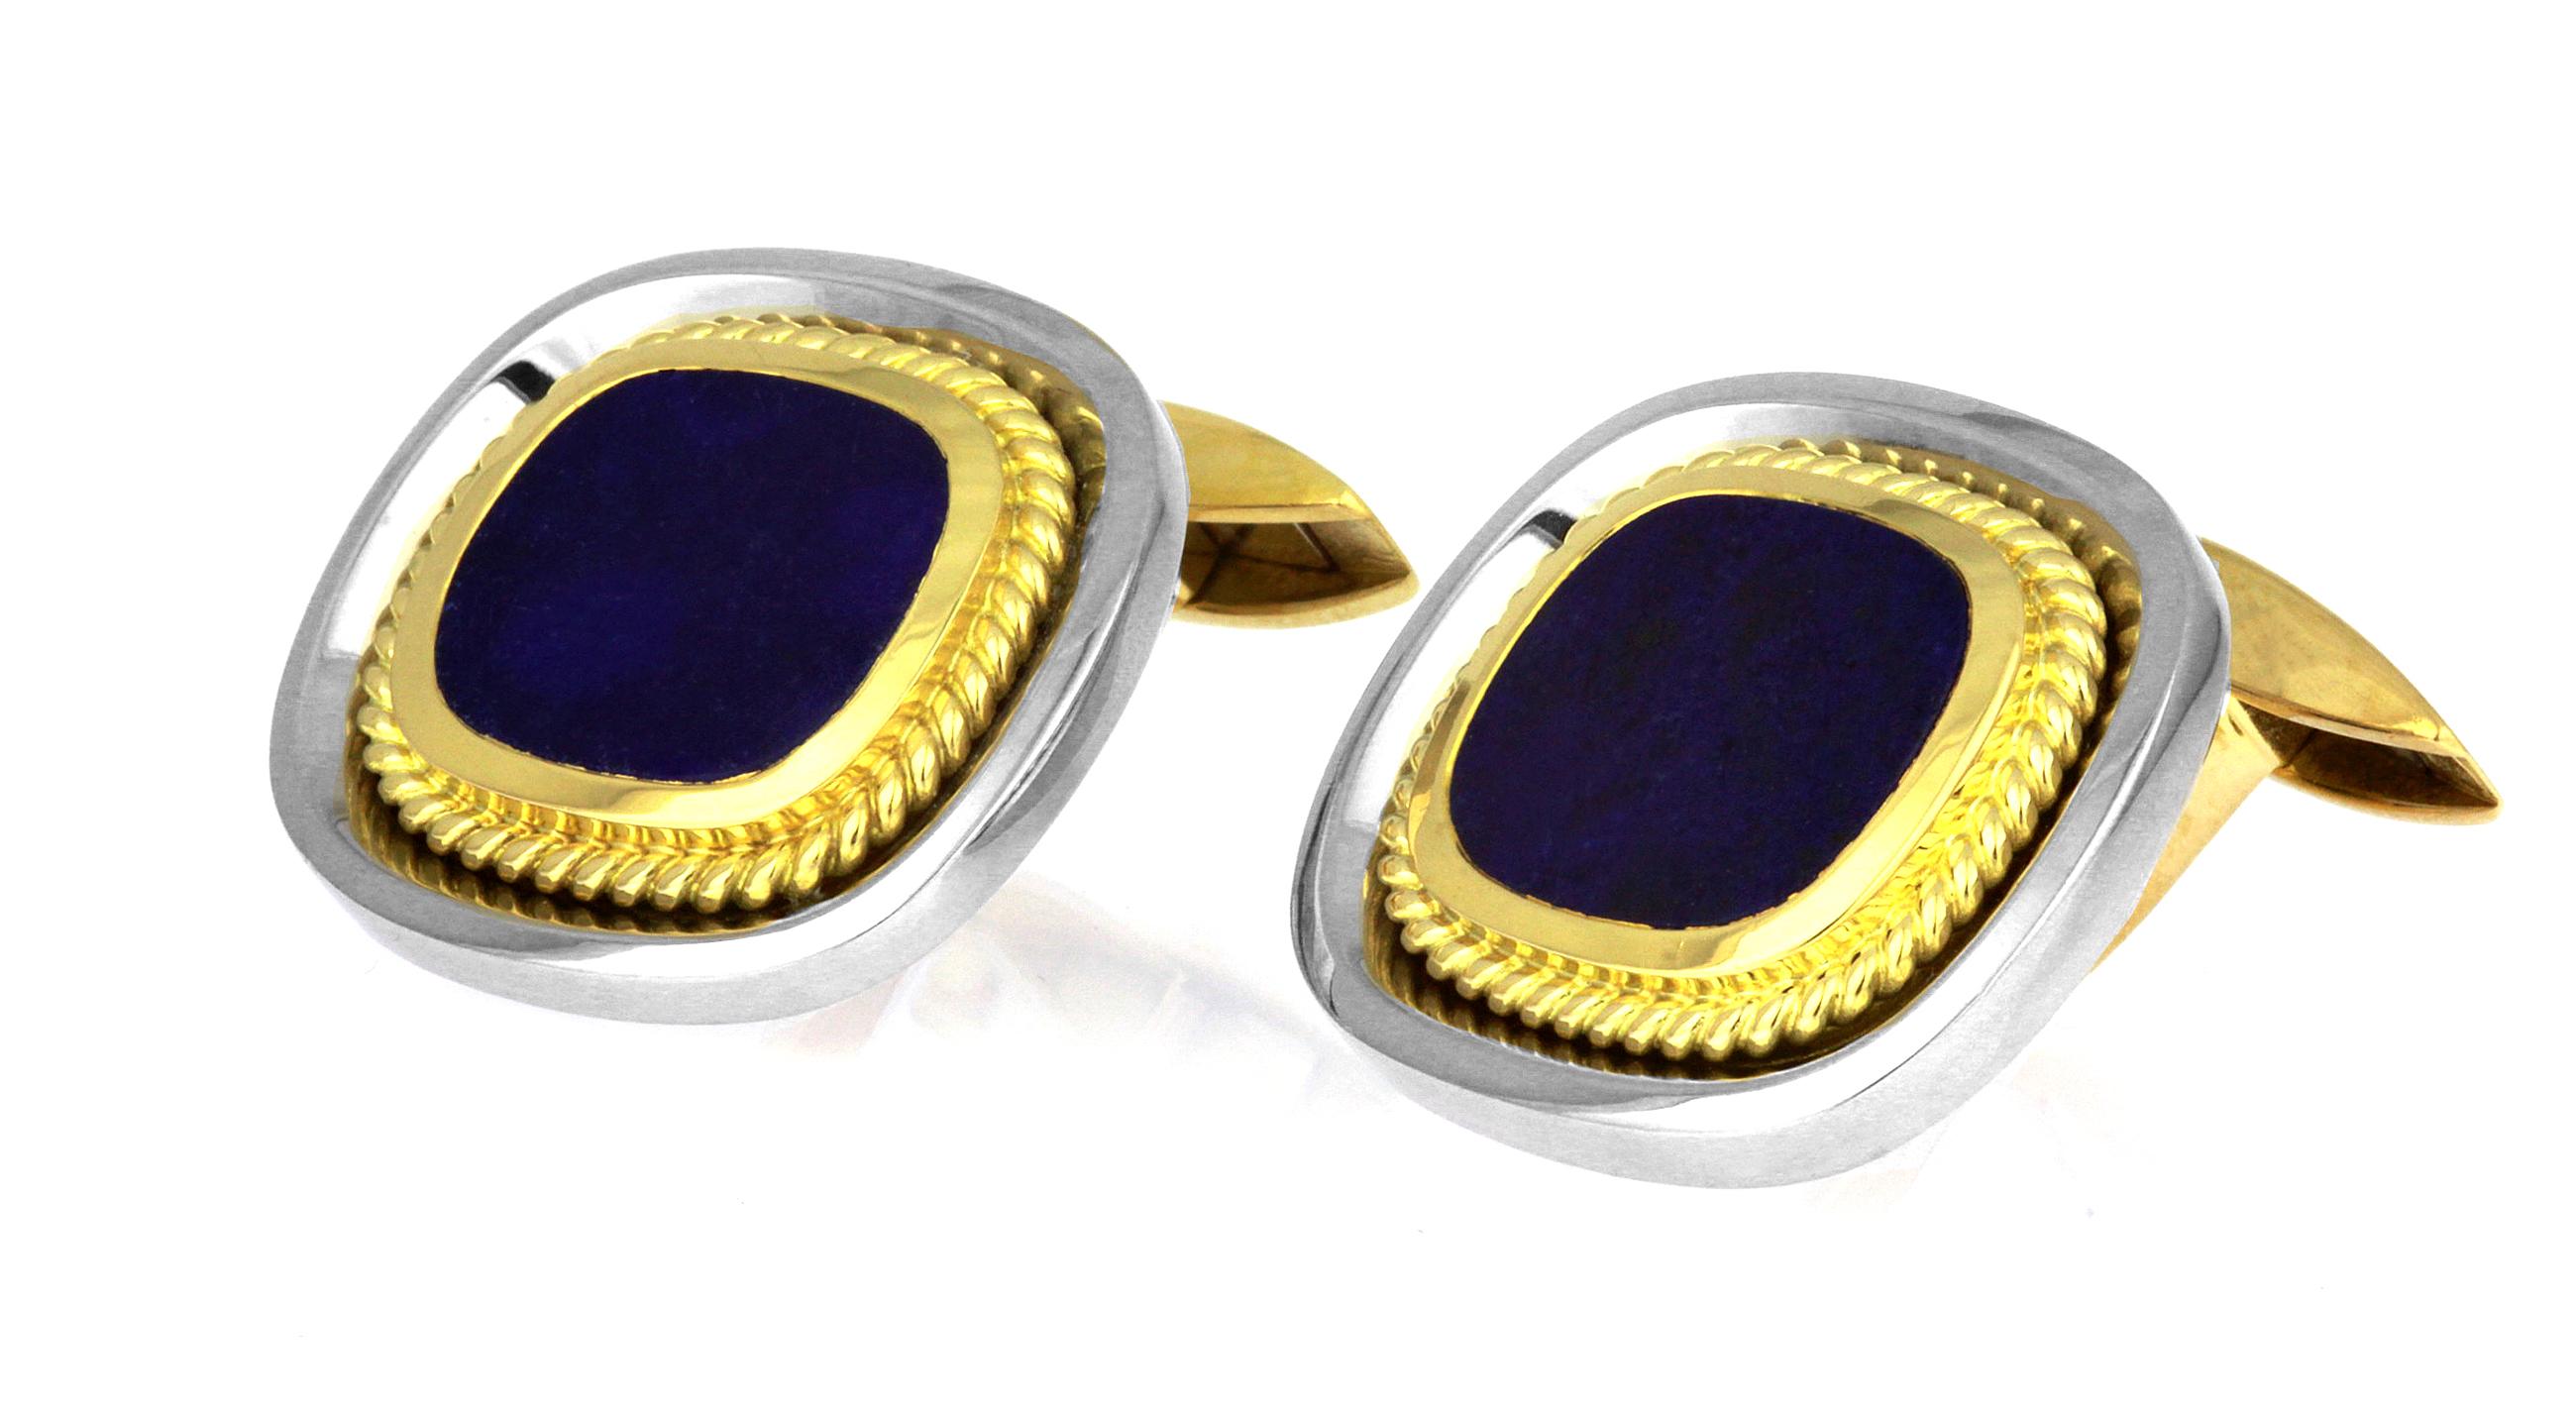 Oval Cut Vintage Cufflinks with Lapis Lazuli in Bimetal 18 Carat White & Yellow Gold For Sale